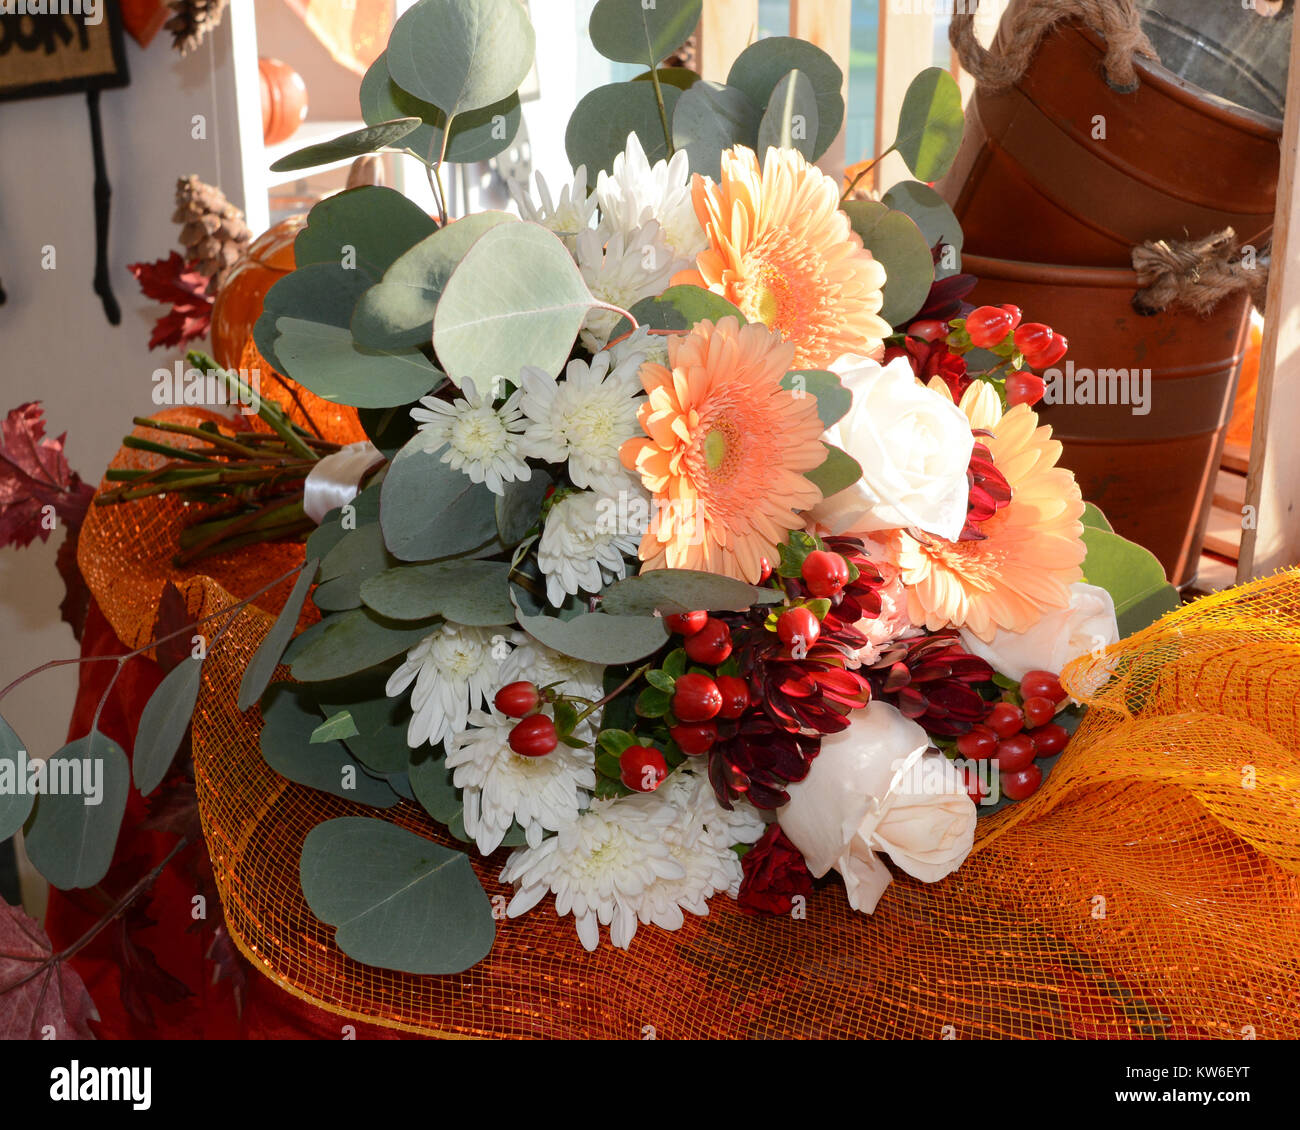 An autumn bridal bouquet of peach gerbera daisies, white mums, red hypericum berries, roses and silver dollar eucalyptus against a fall background. Stock Photo